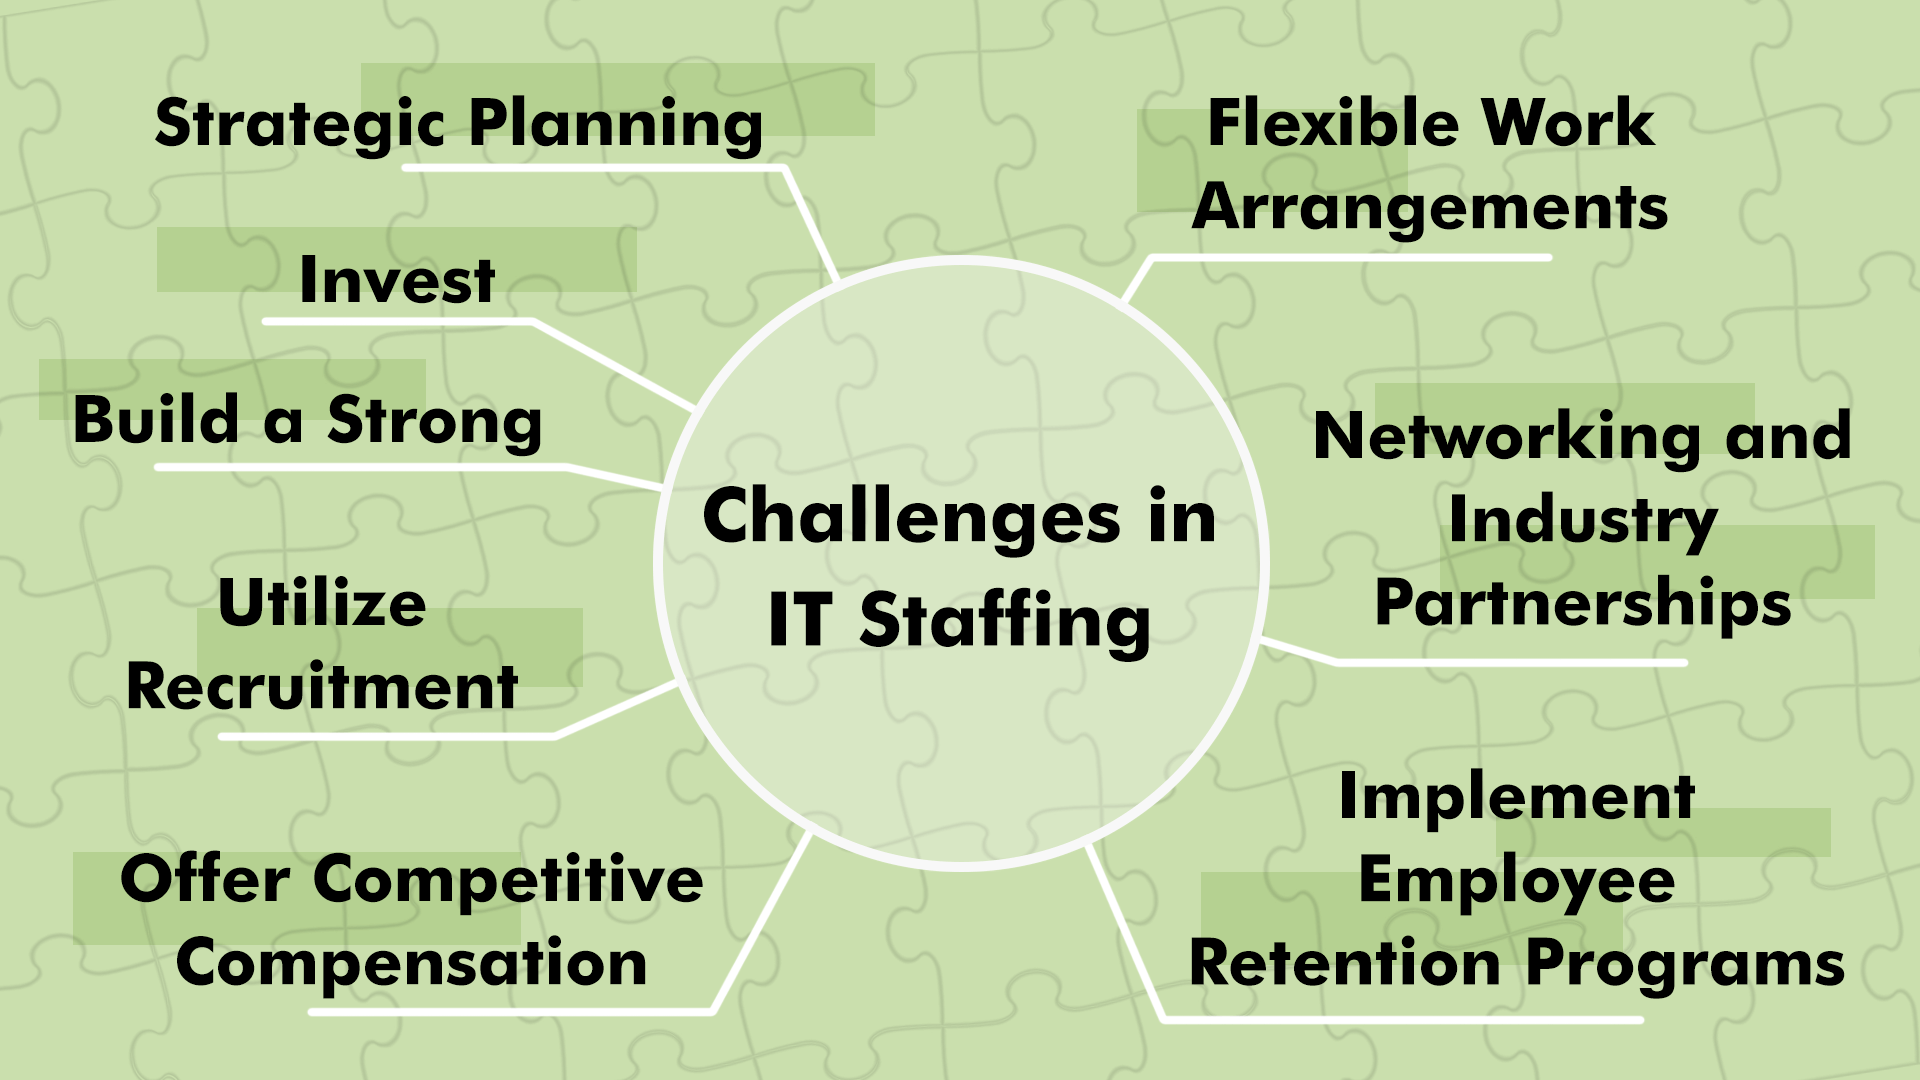 Challenges in IT Staffing